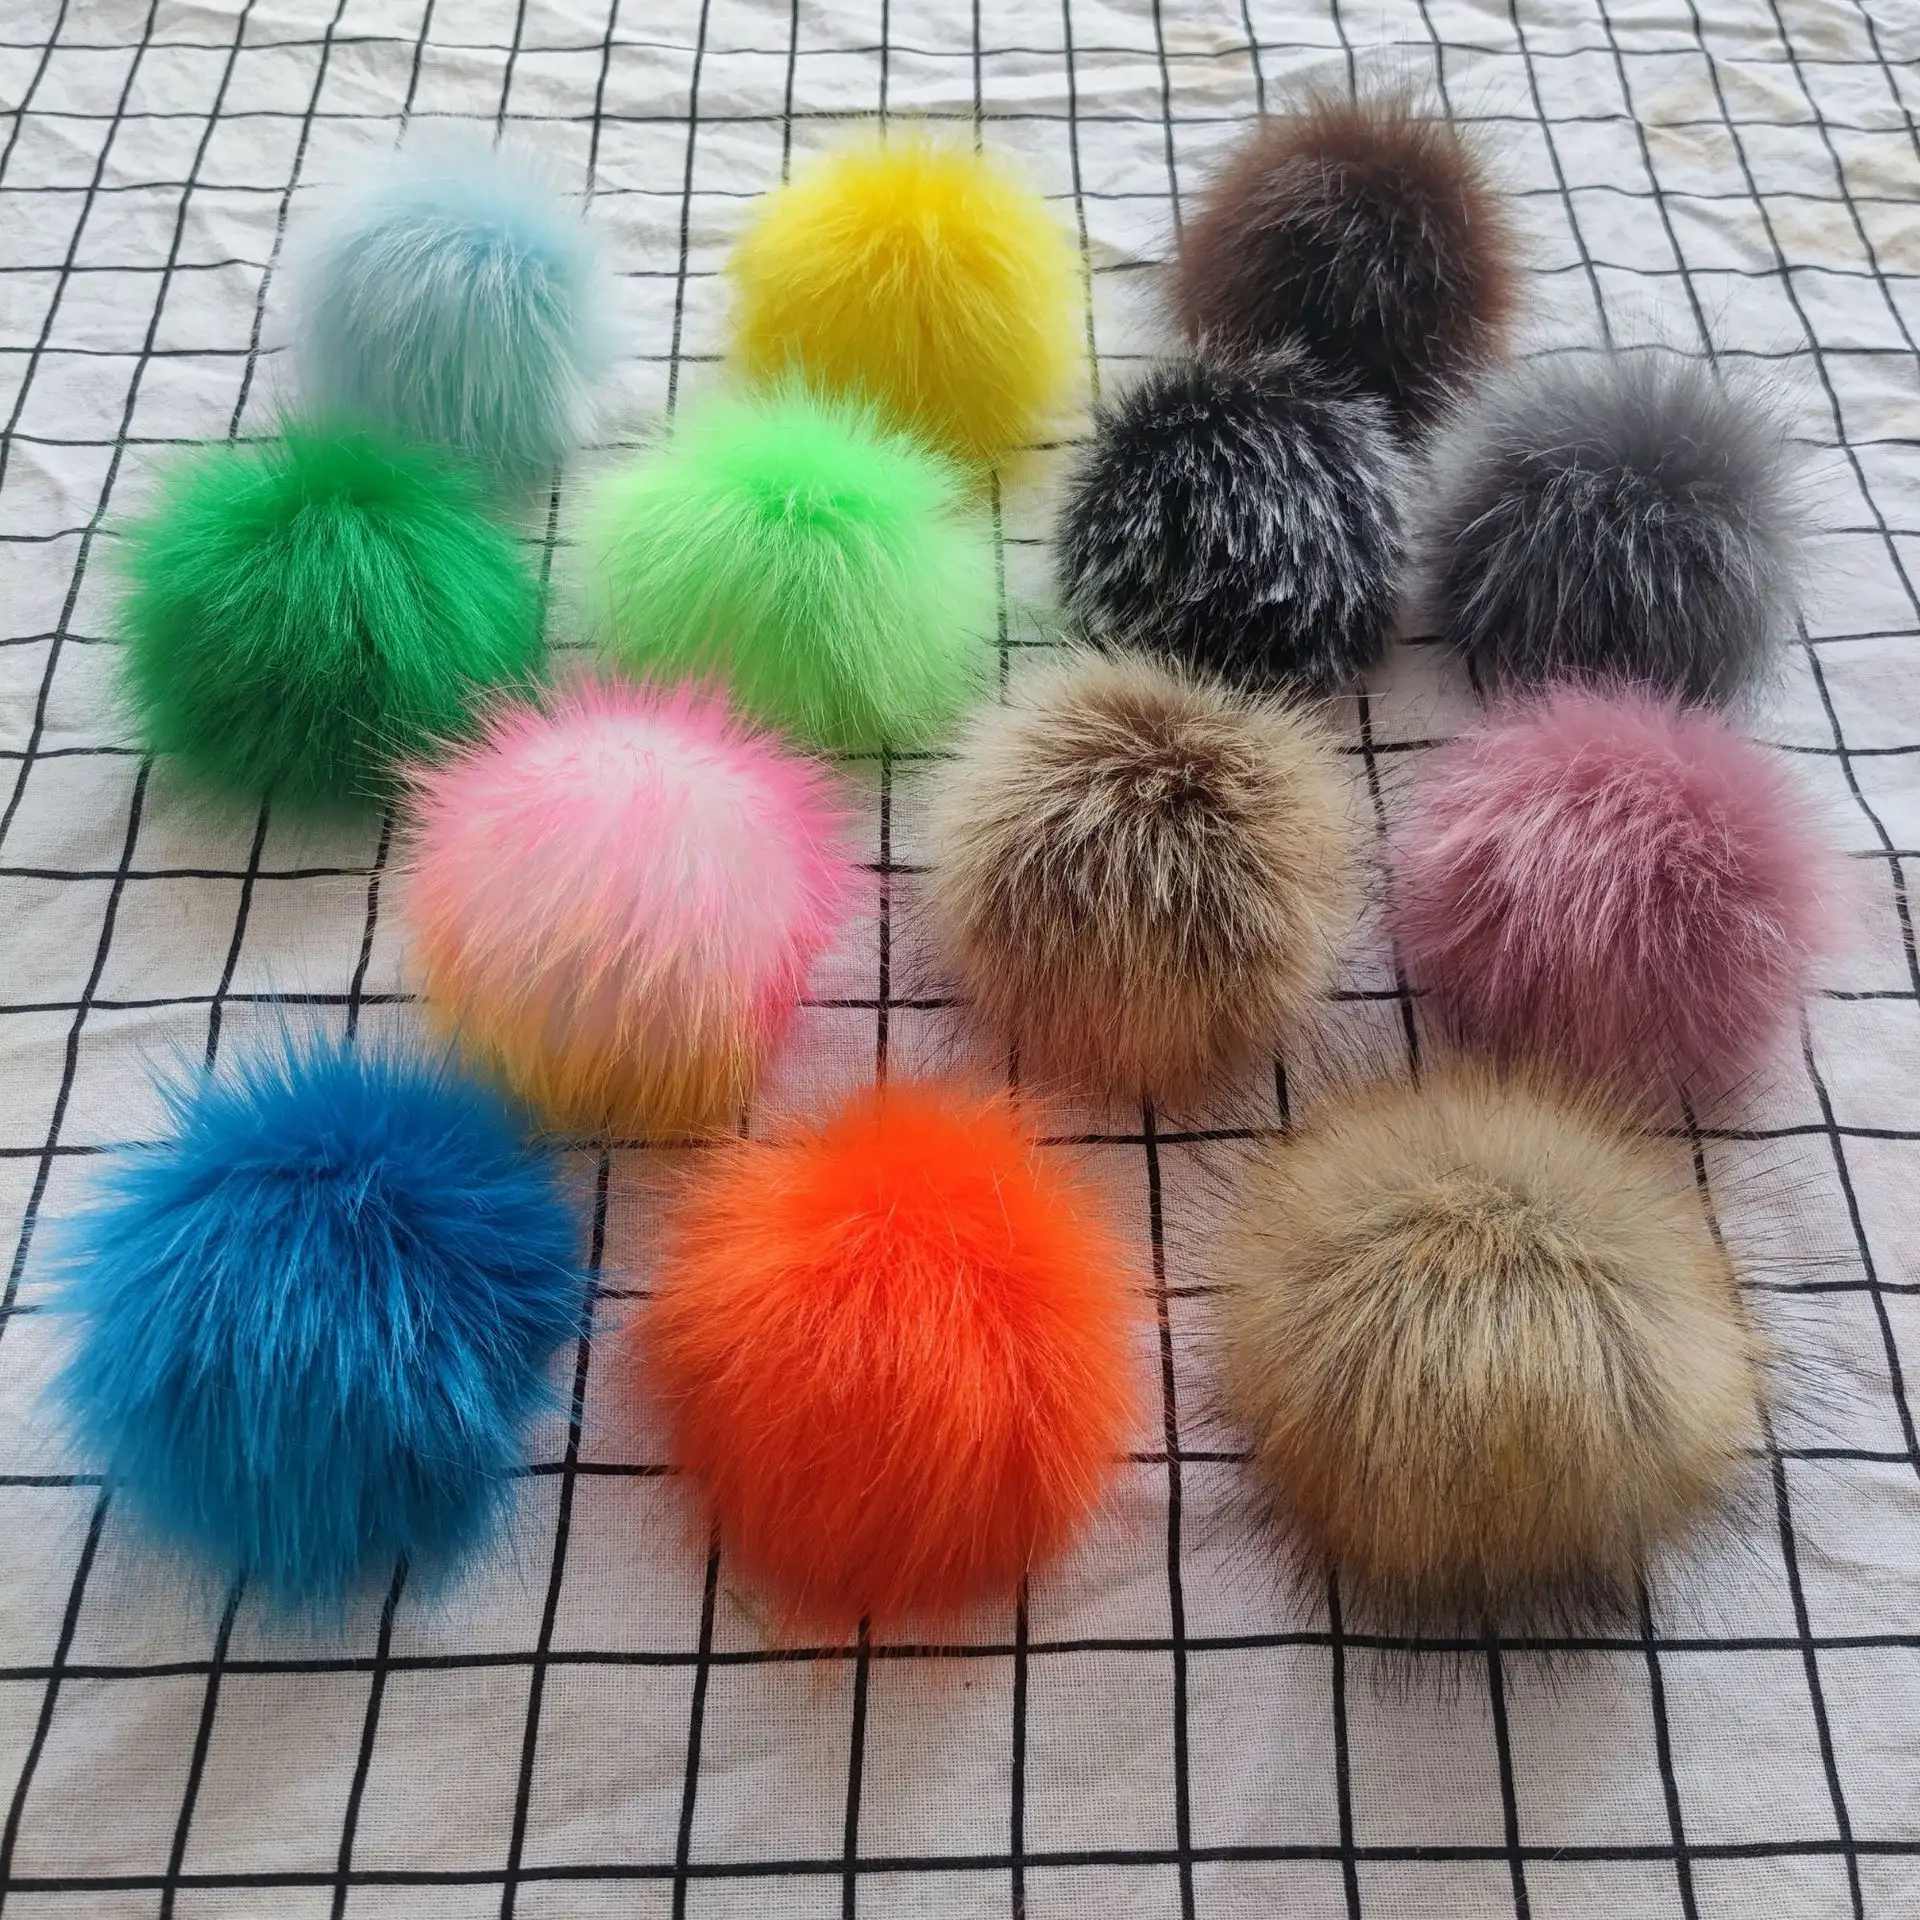 Made In China 7cm Faux Fur Pom Poms Faux Rabbit Fur Pompoms With Elastic Rubber Bands